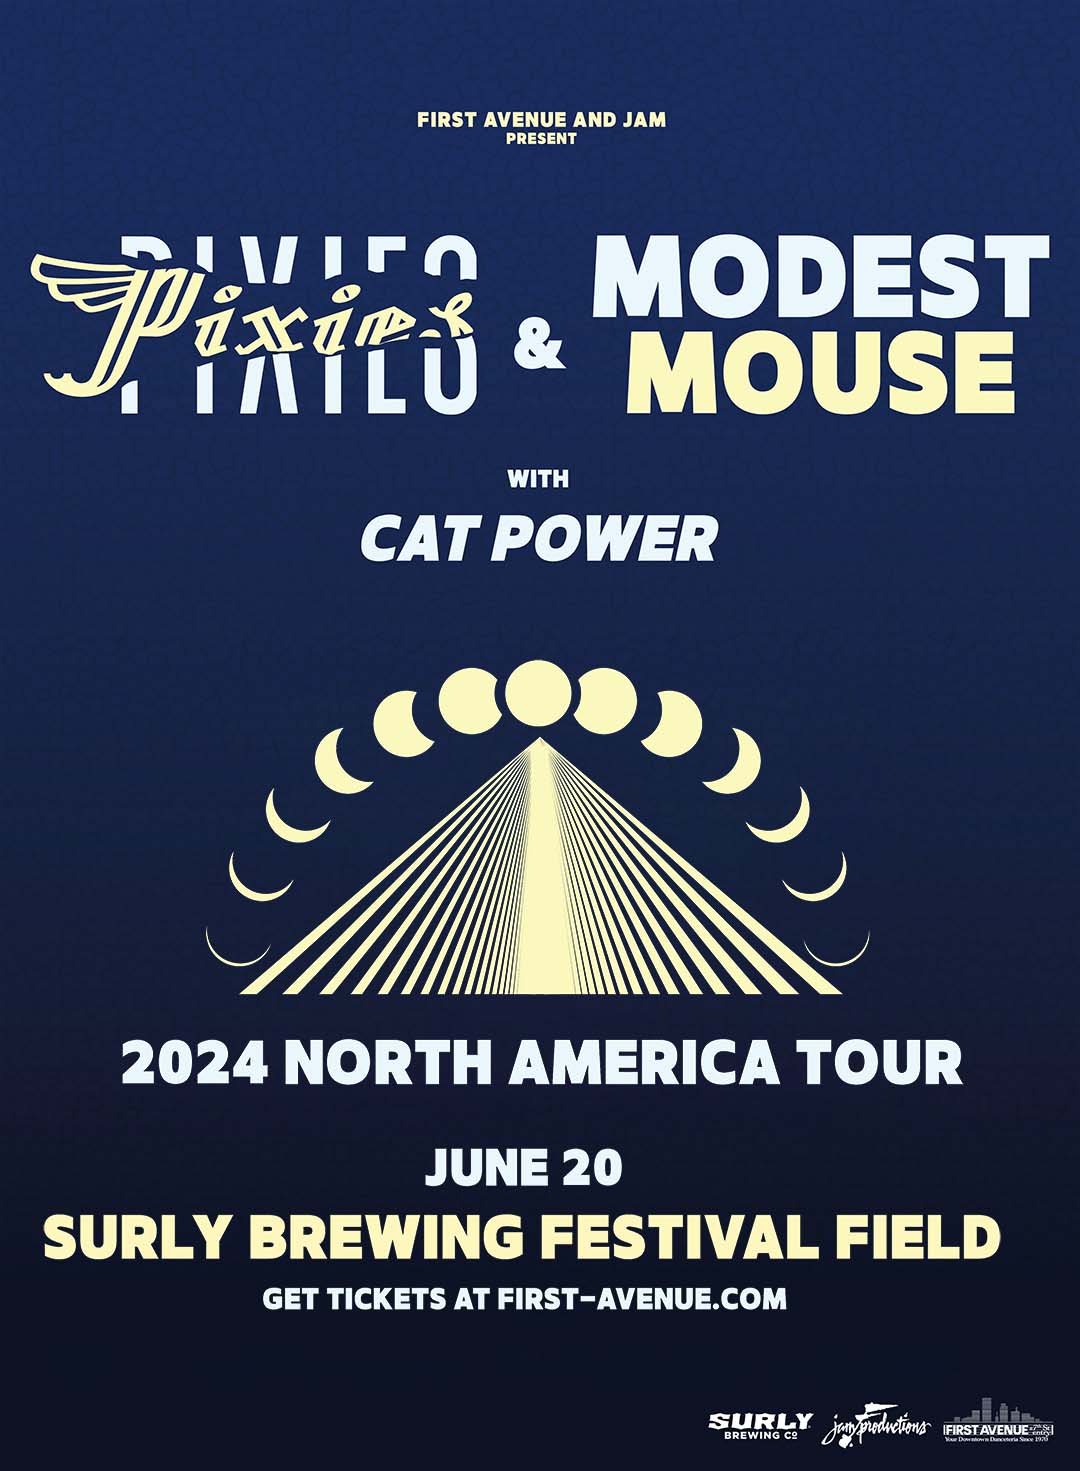 Pixies and Modest Mouse ★ Surly Brewing Festival Field First Avenue